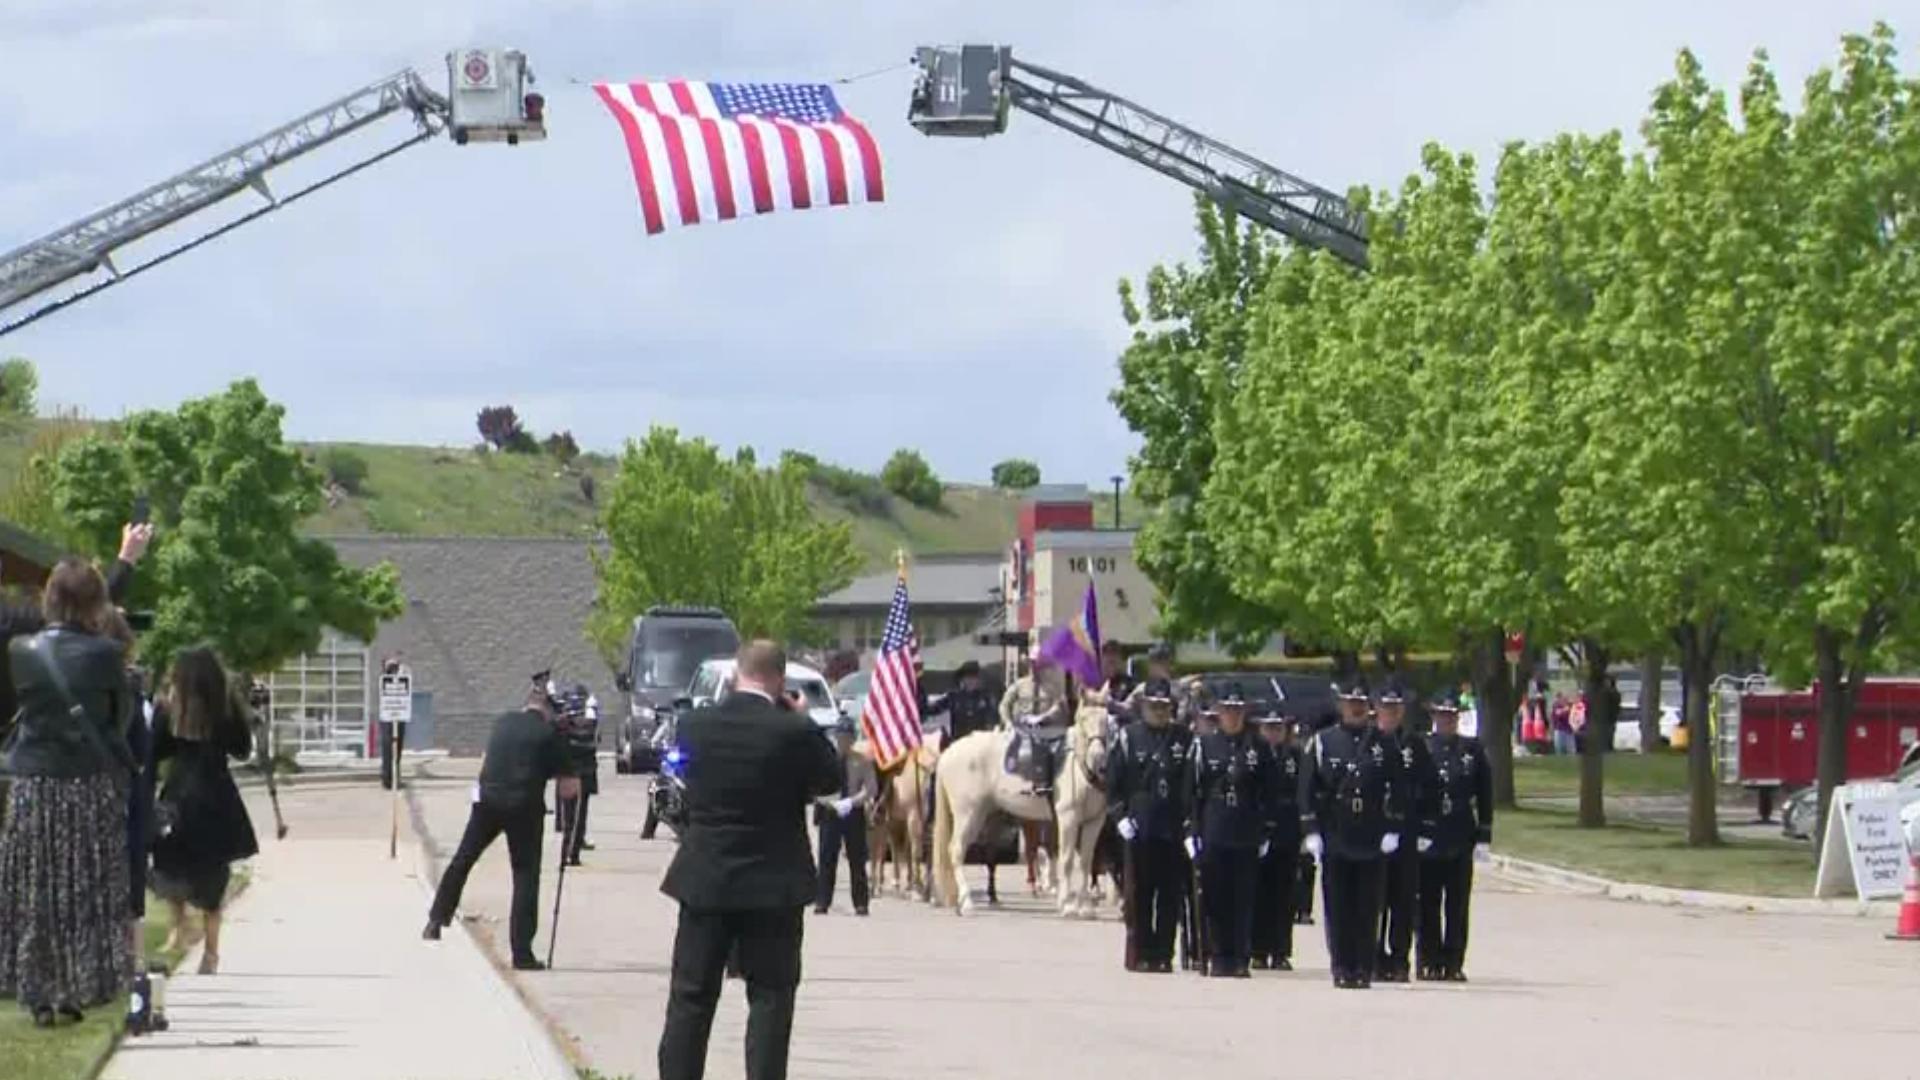 Hundreds of first responders participated in a procession across the Treasure Valley honoring Deputy Tobin Bolter ahead of Tuesday's memorial service.